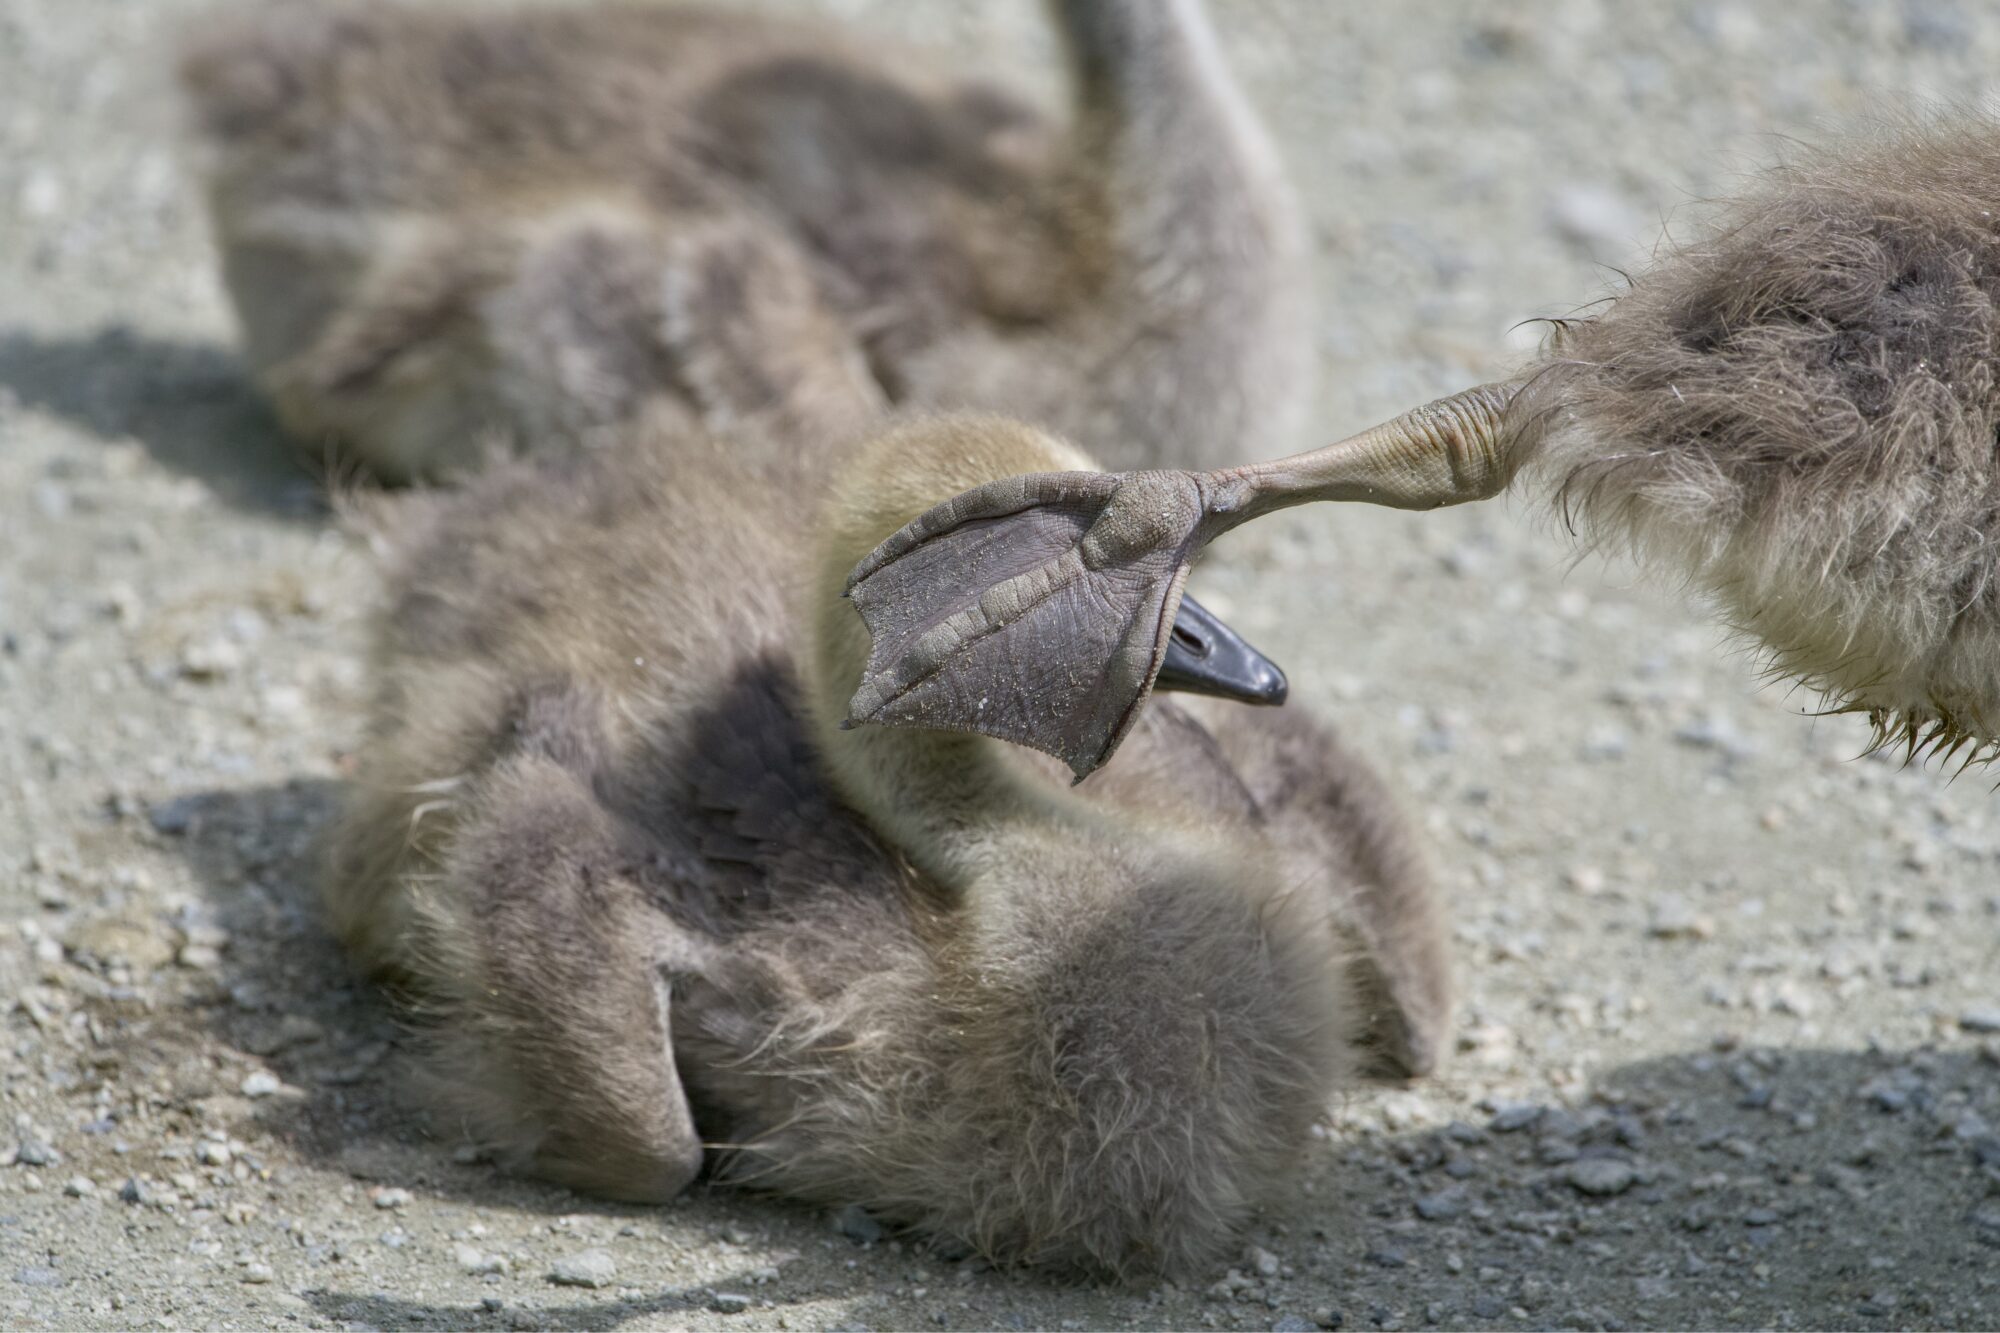 A Canada Gosling, somewhat grown with greyish down, is resting on the gravelly ground. Another gosling next to it is stretching its leg backwards, blocking the first one's face from the picture